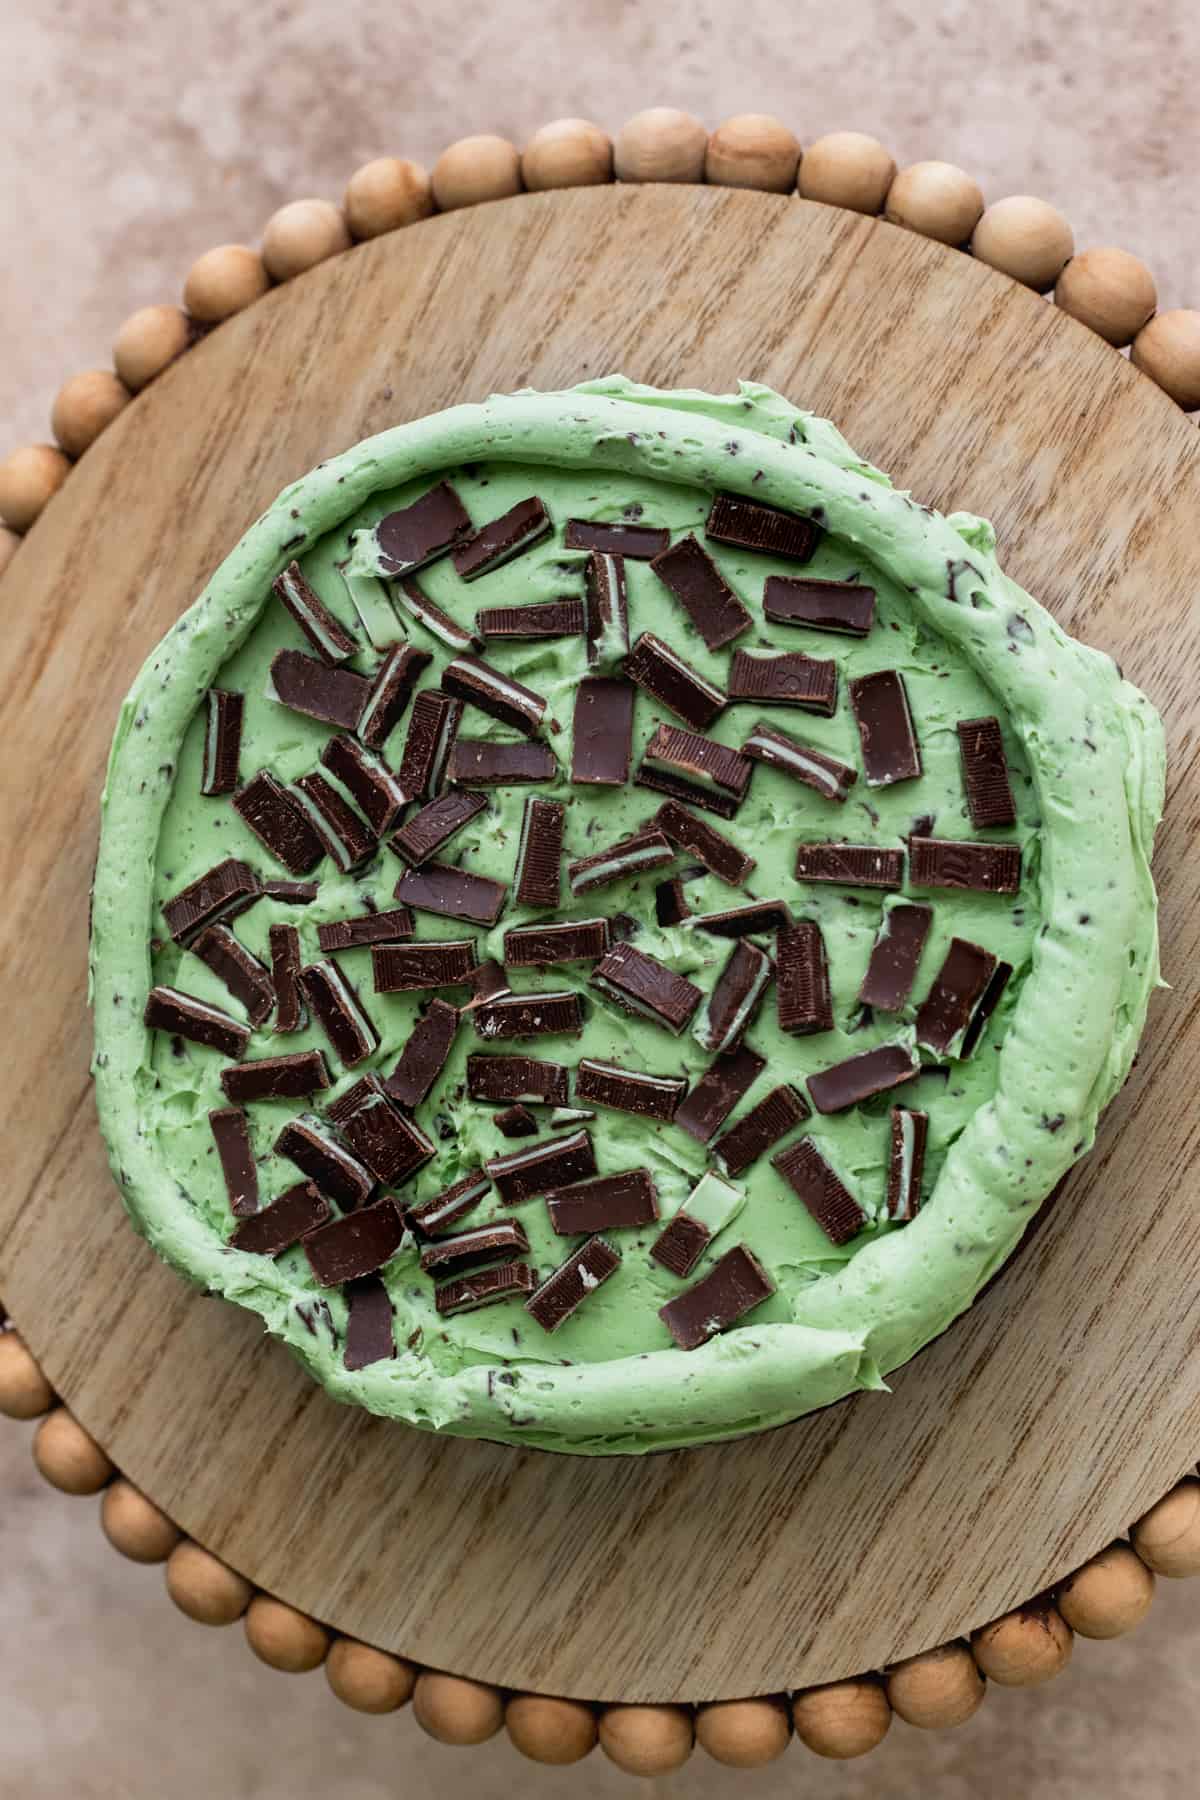 Andes mints on top of cake layer.